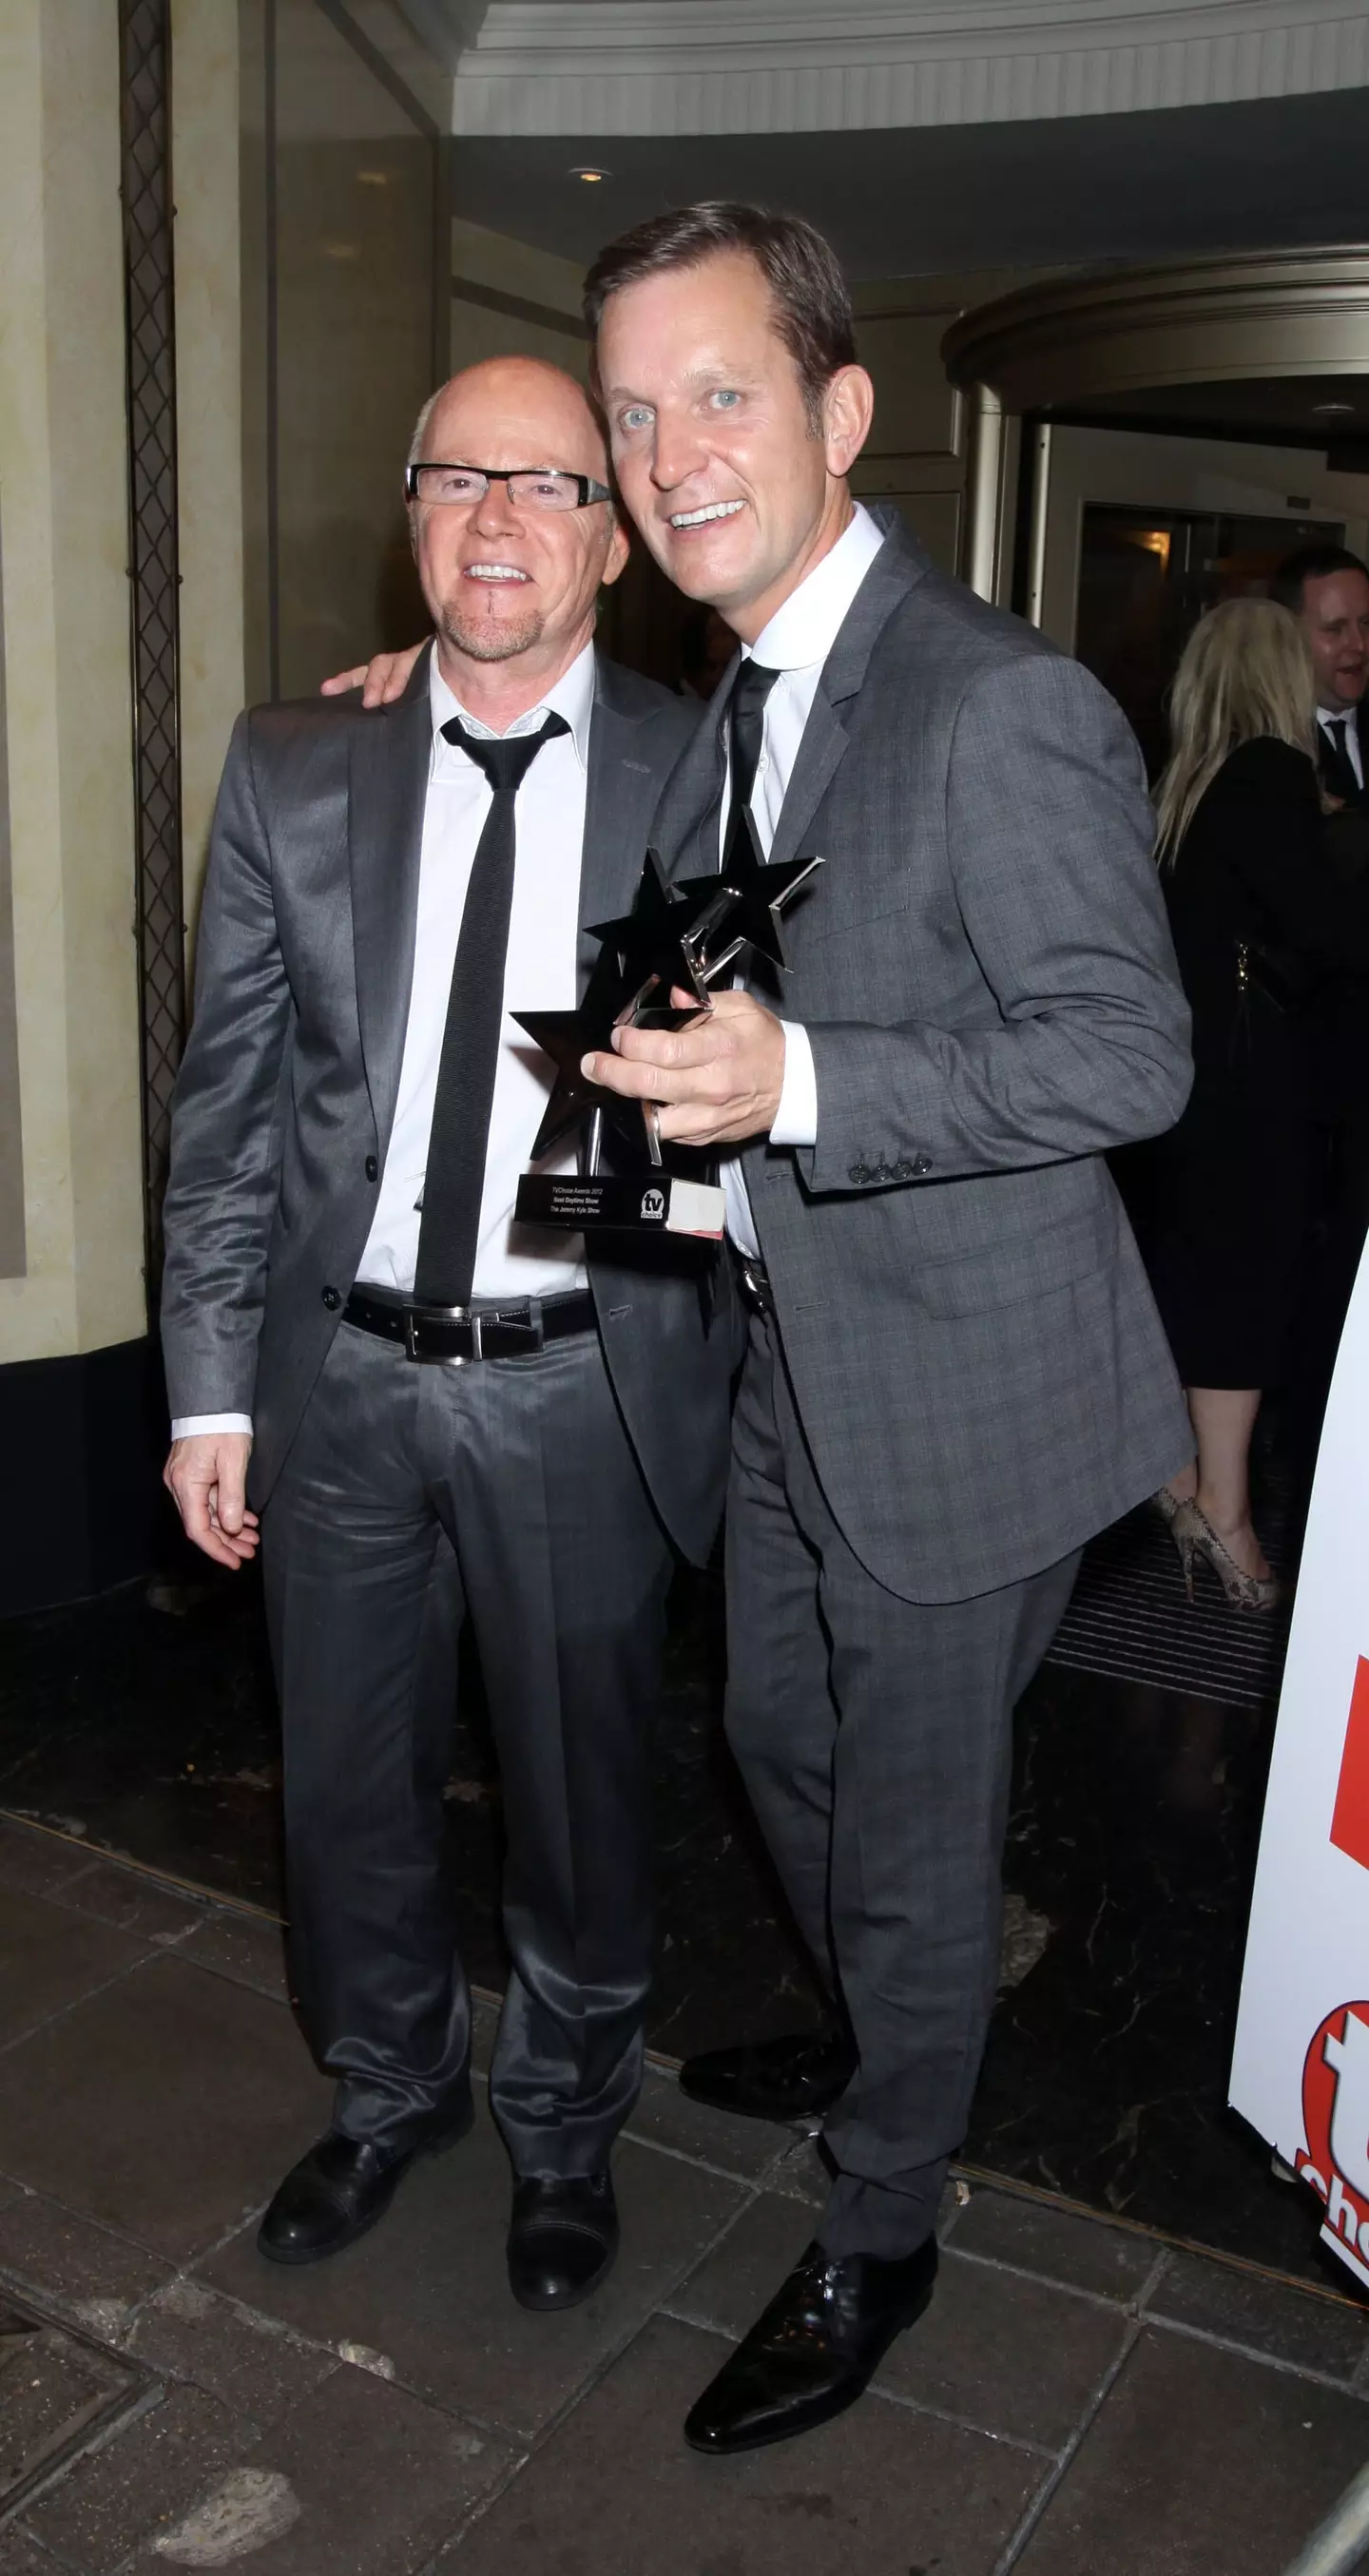 Graham Stanier and Jeremy Kyle at the TV Choice Awards in 2012.